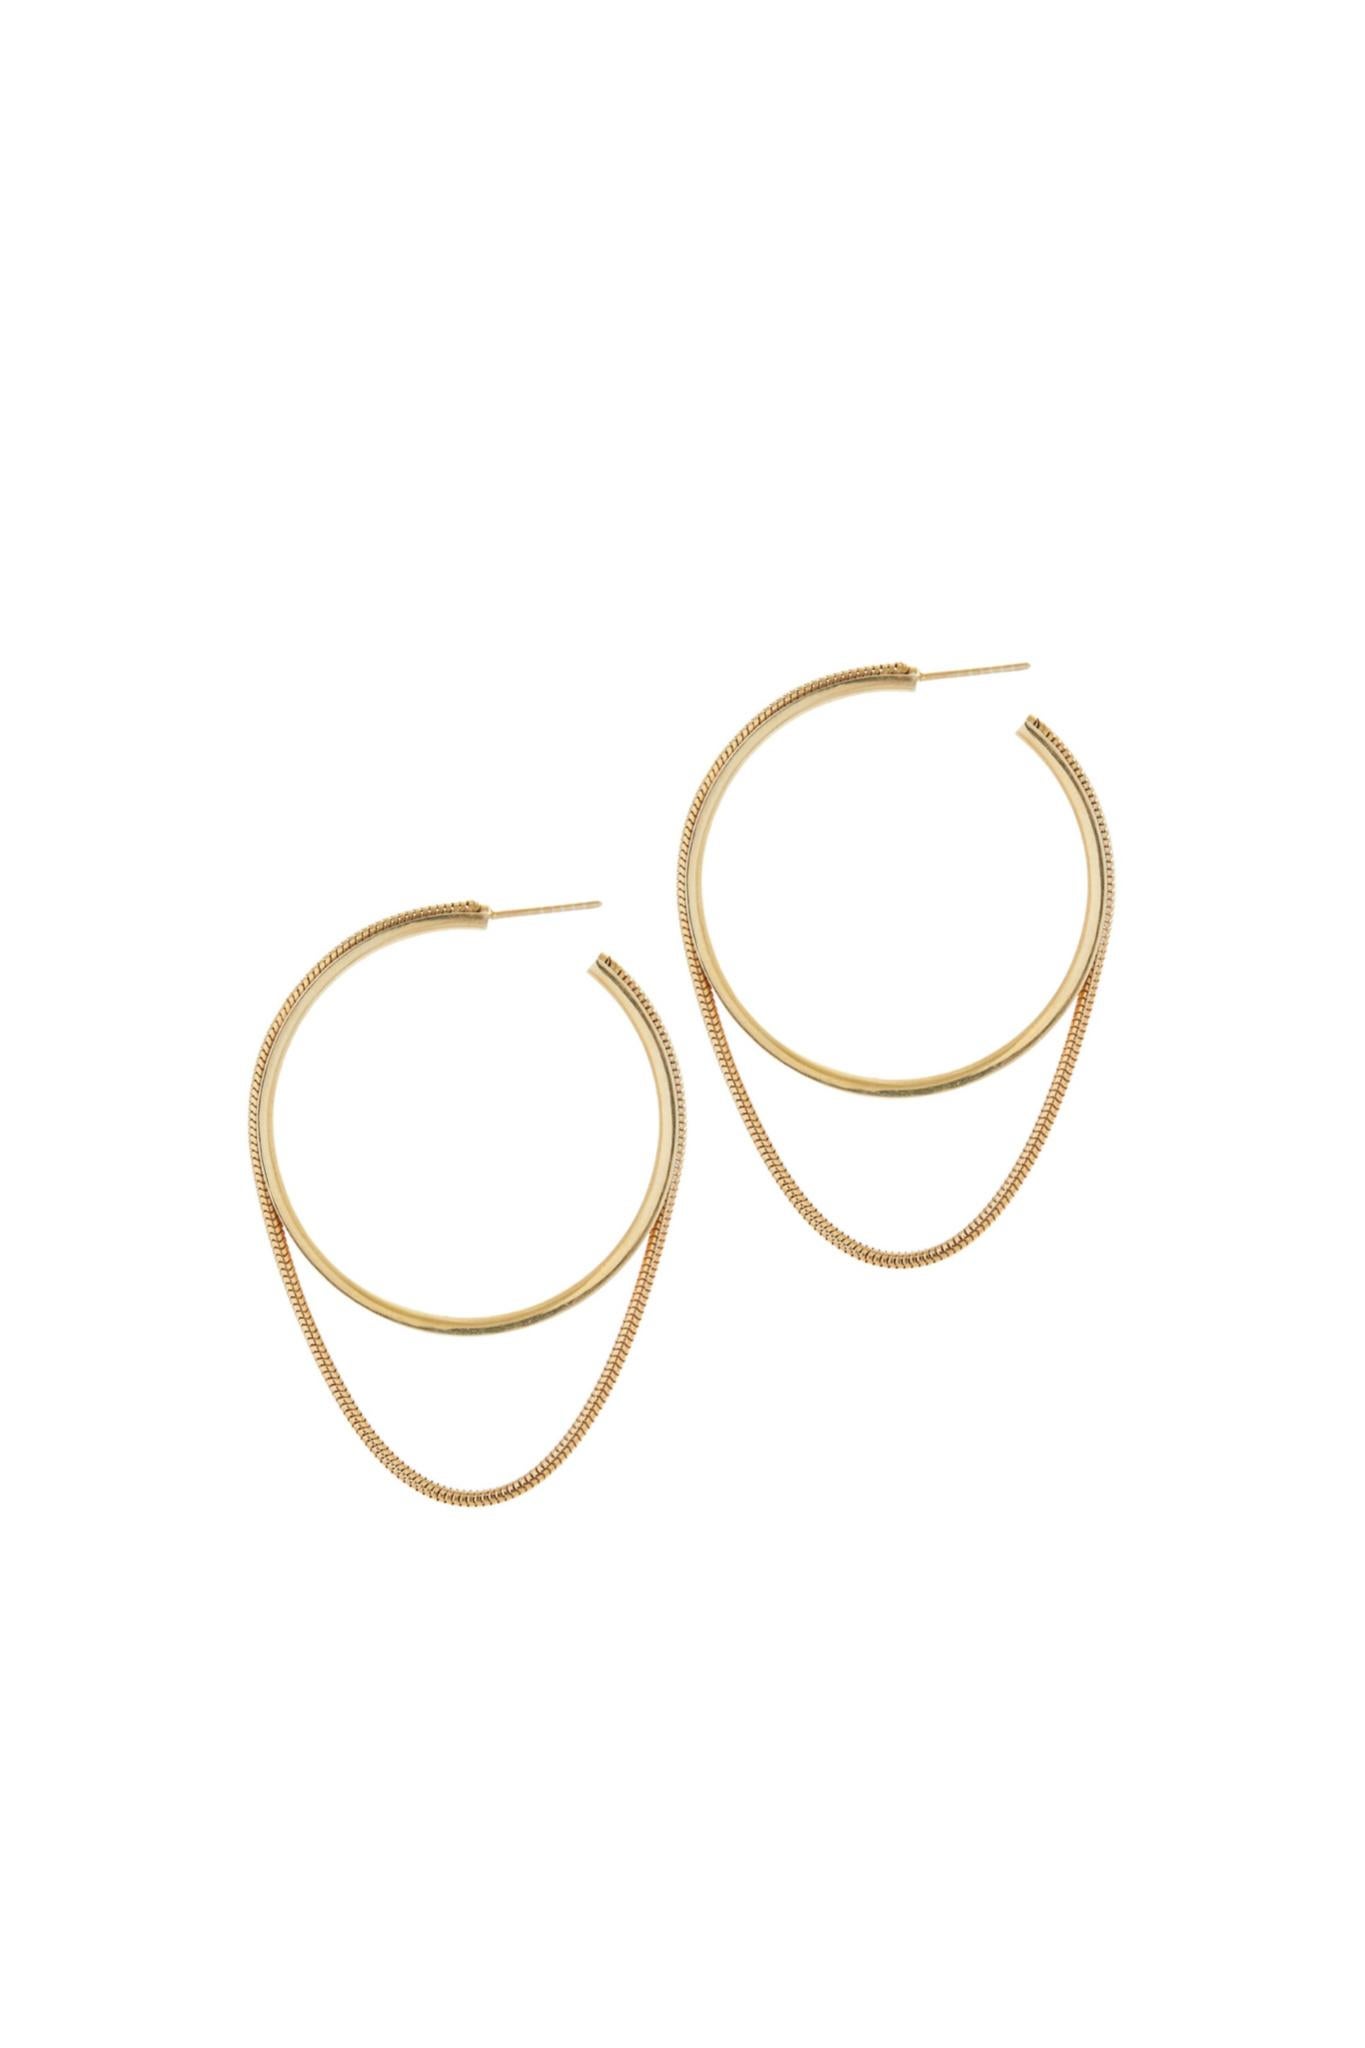 Twinkler Hoops Large  Earrings 

EXCLUSIVELY SOLD ON 1STDIBS

The twinkler large hoops are a combination of a classic and eternal design with a touch of snake chain. This larger version is the ideal shape to make a statement and their lightweight